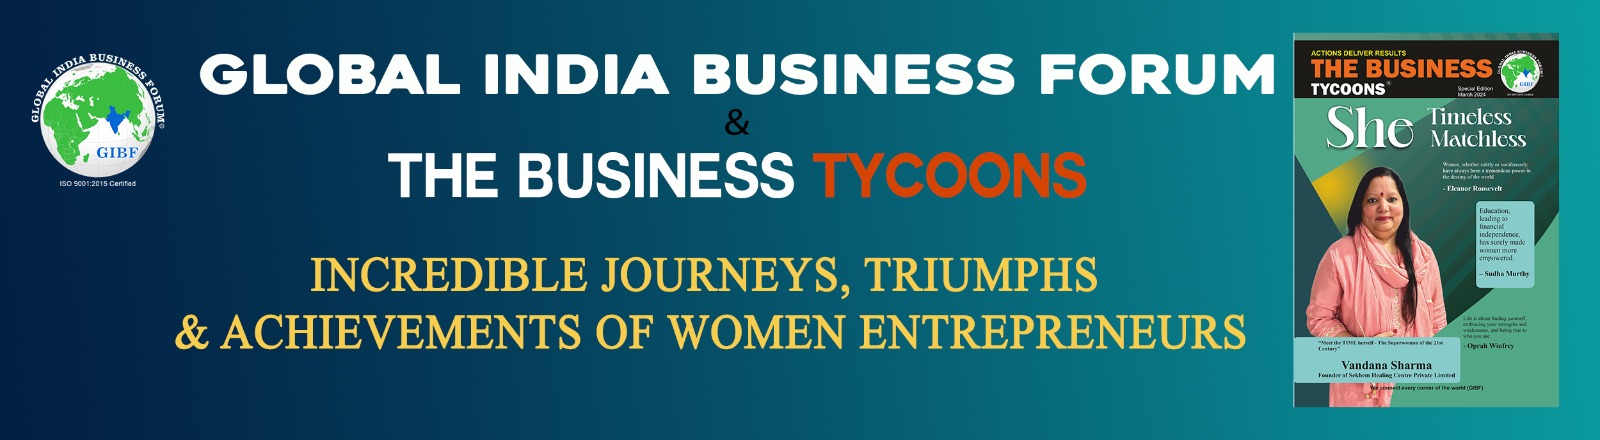 The Business Tycoons  She timeless Matchless slider